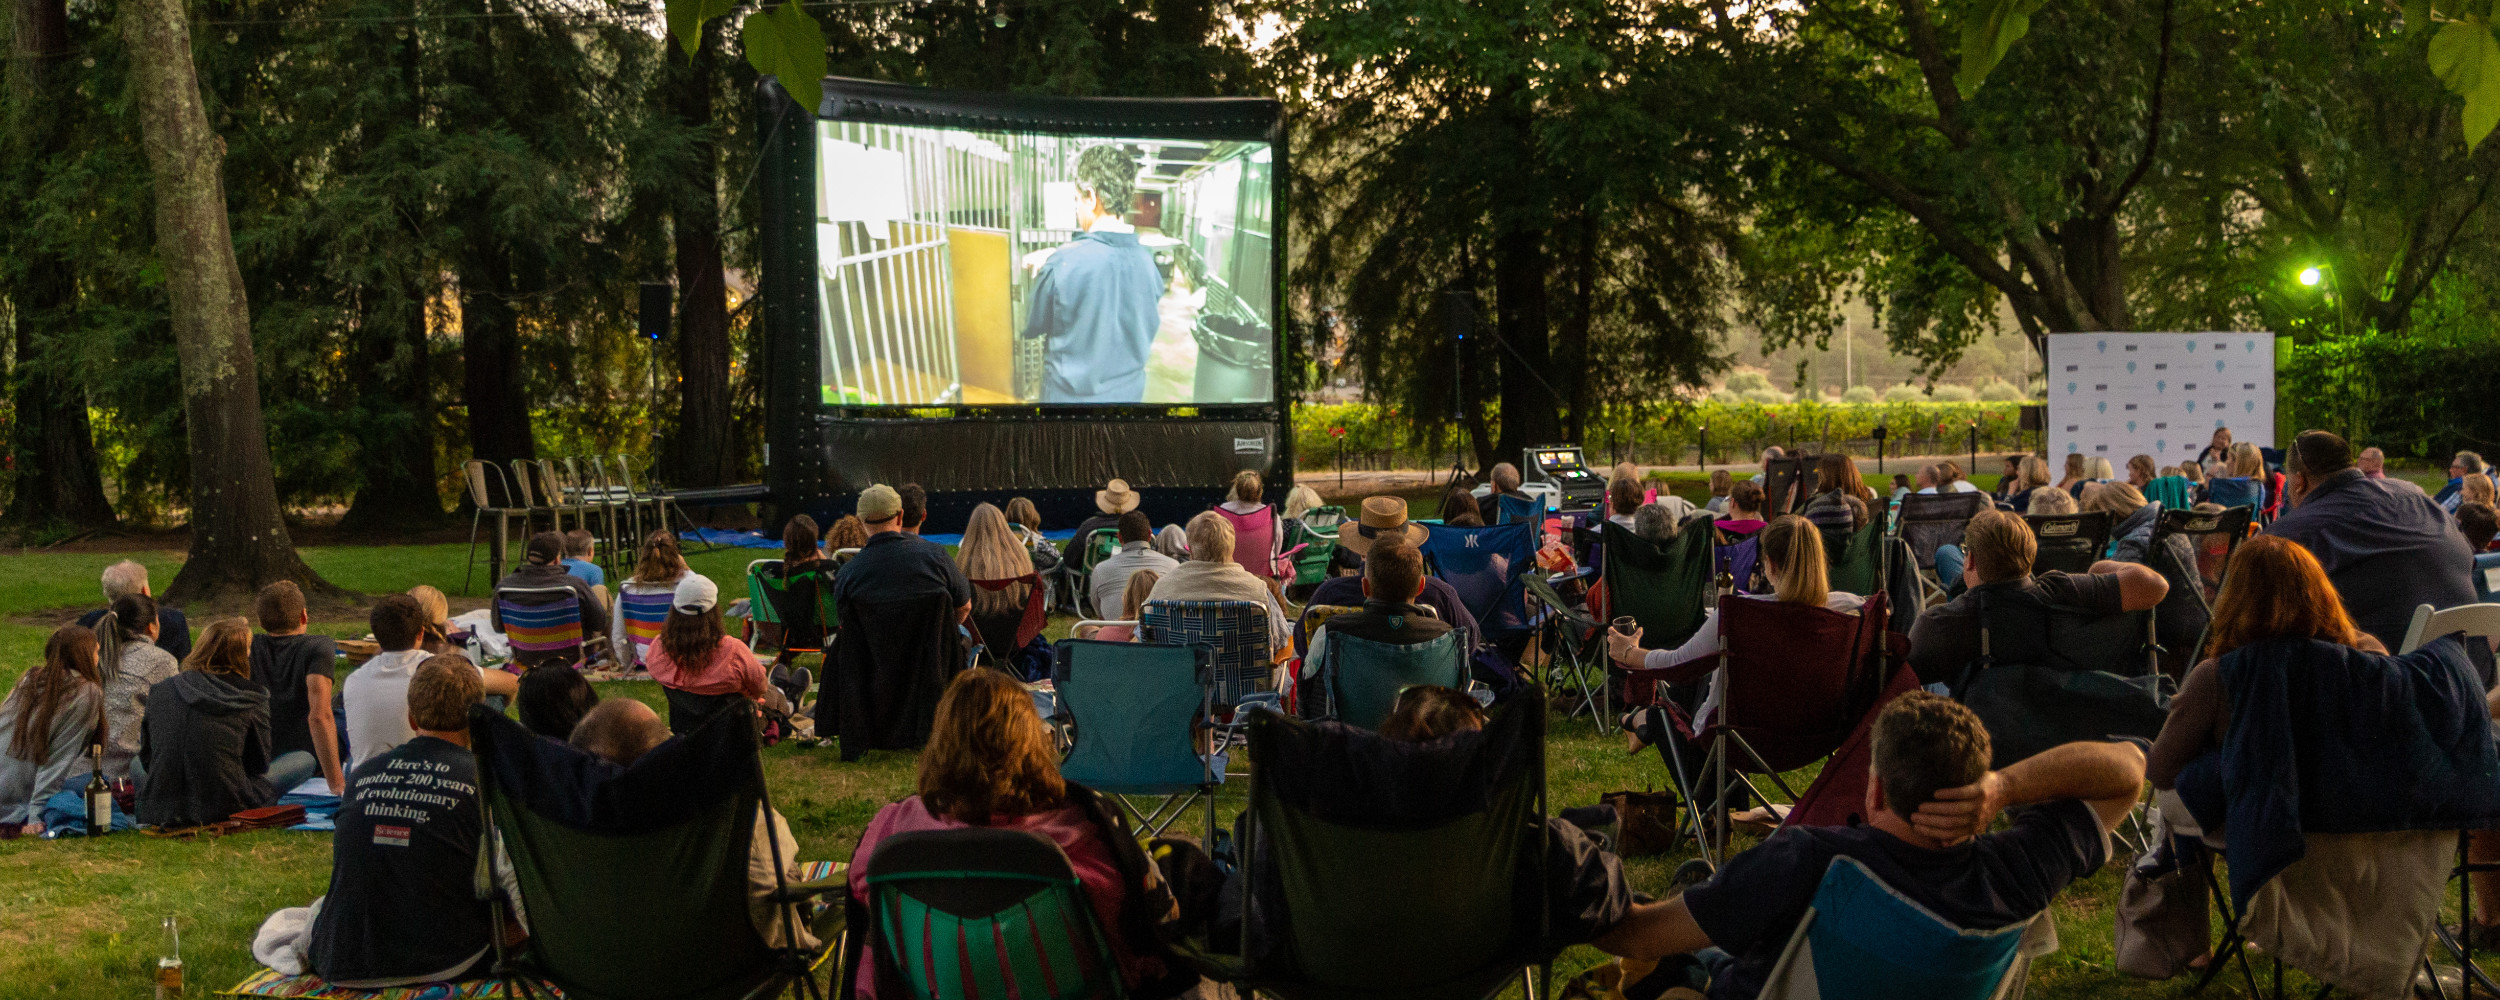 New-Hampshire-outdoor-movie-party